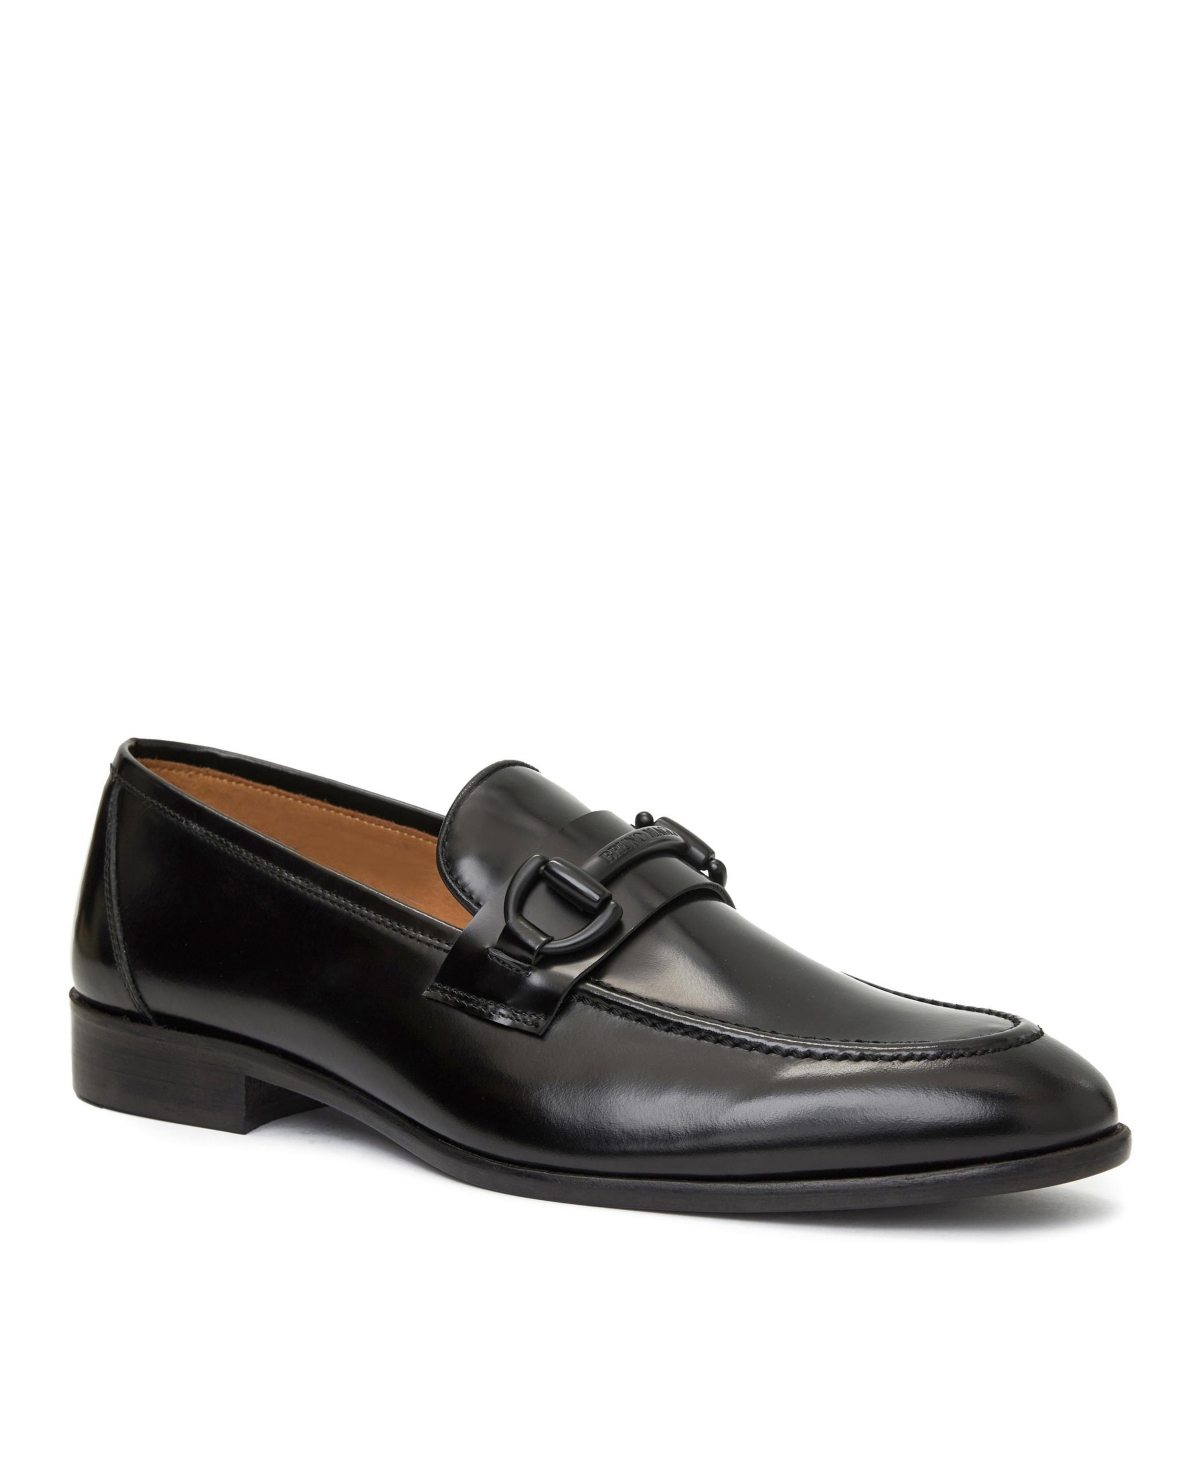 Men's Alessio Leather Bit Loafers - Black